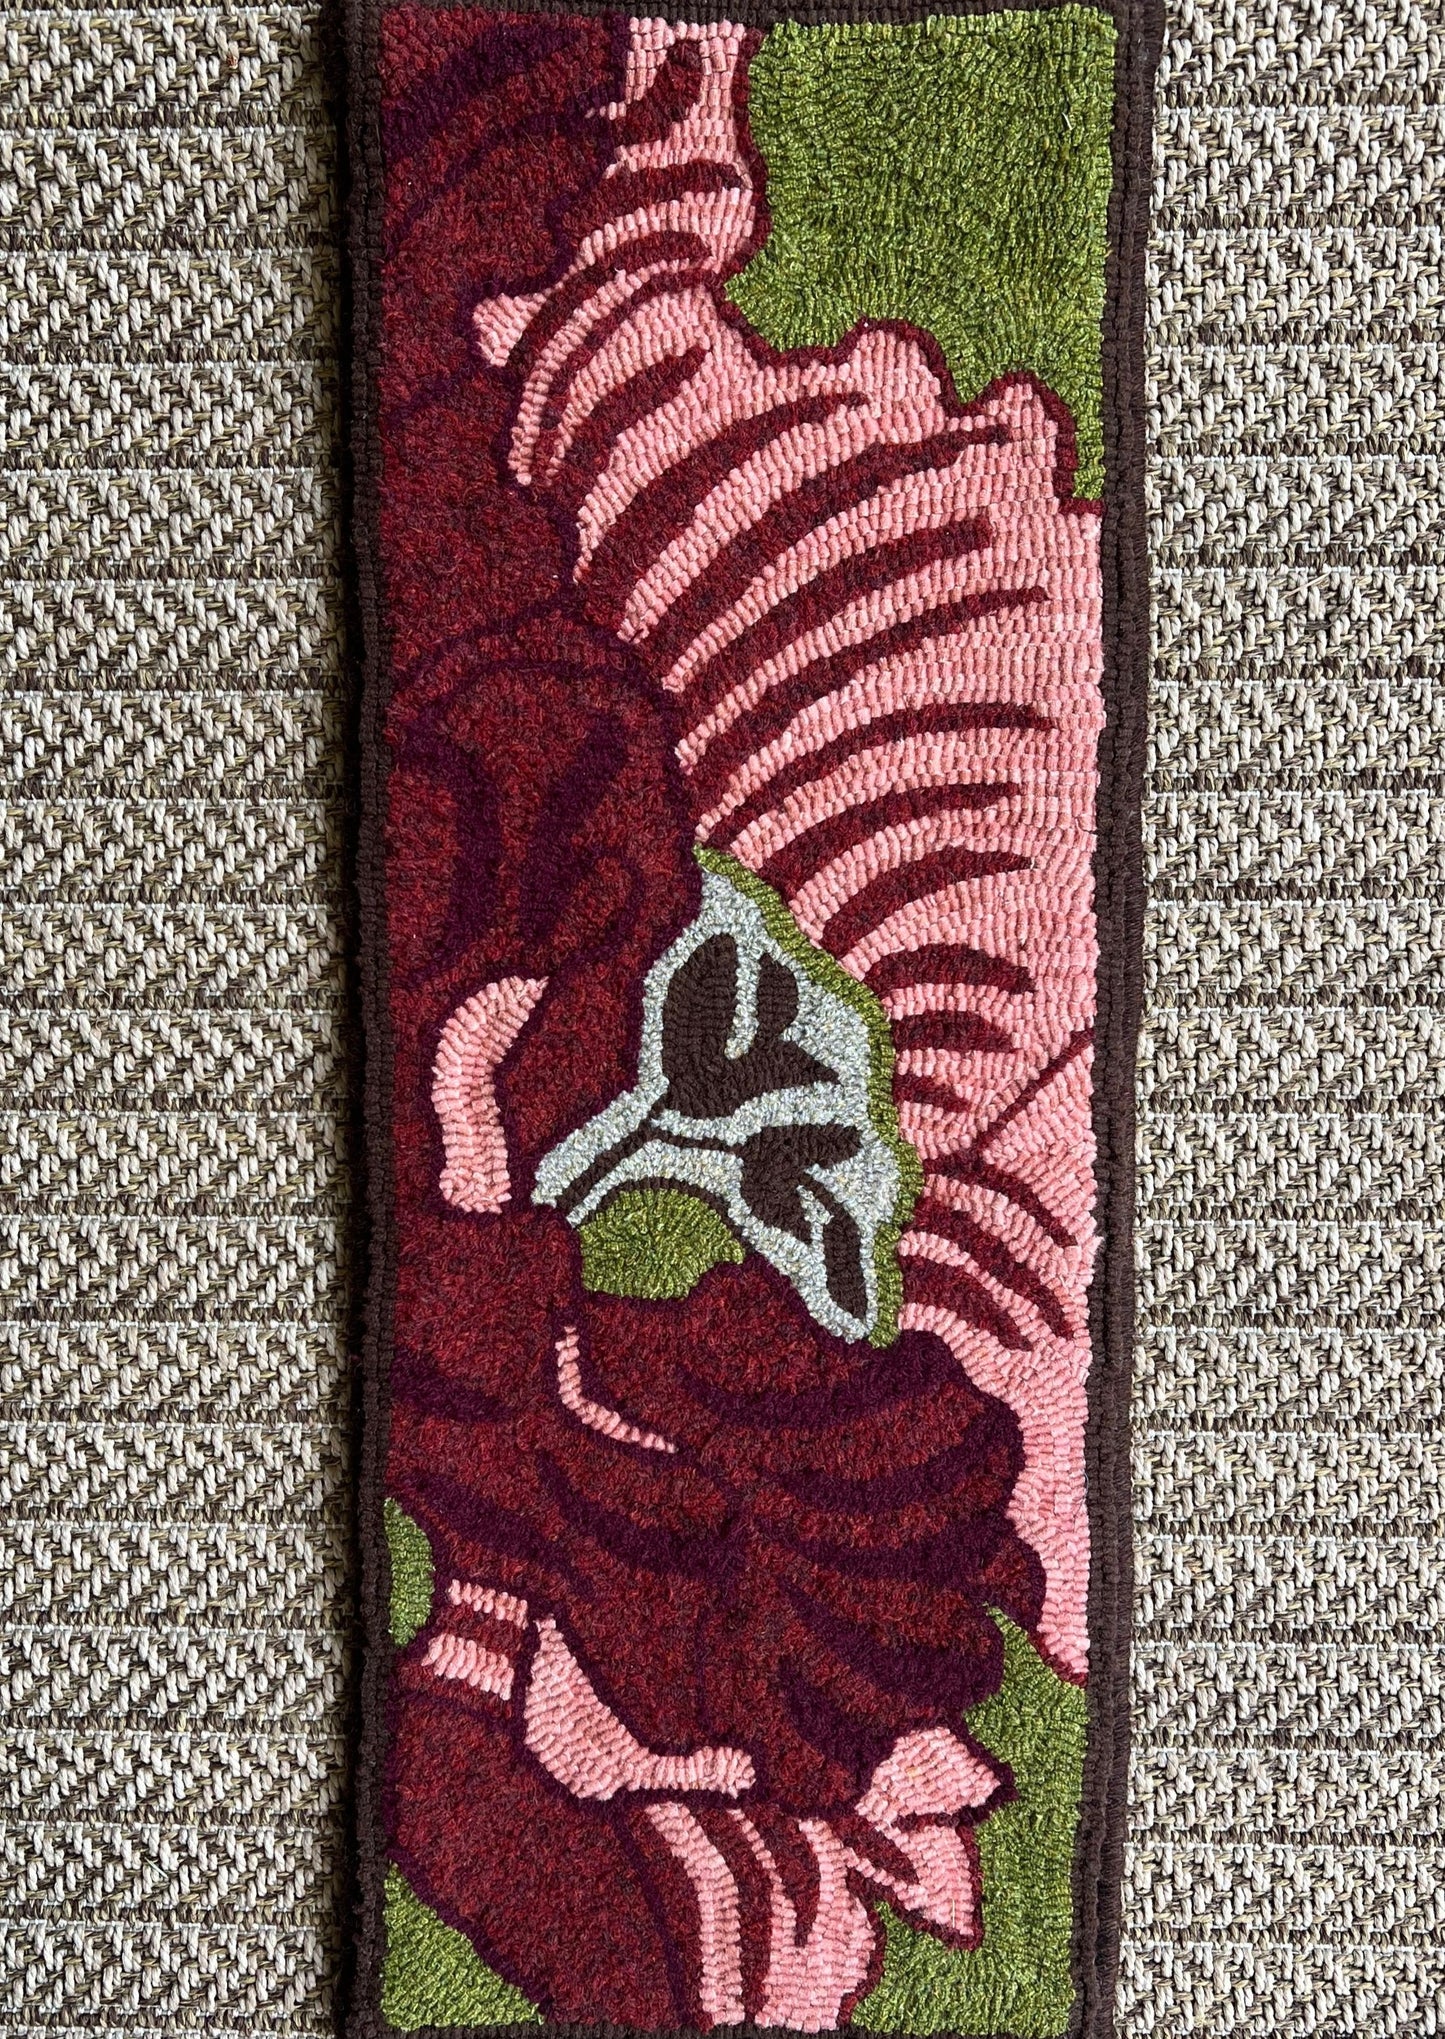  x Crimson- PDF Rug Hooking Digital Download Pattern by Orphaned Wool. This is a 5 page downloadable file of an abstract vertical flower design in crimson colors. Paper pattern is designed to be enlarge will size suggestions and formula. Copyright © 2023 Kelly Kanyok